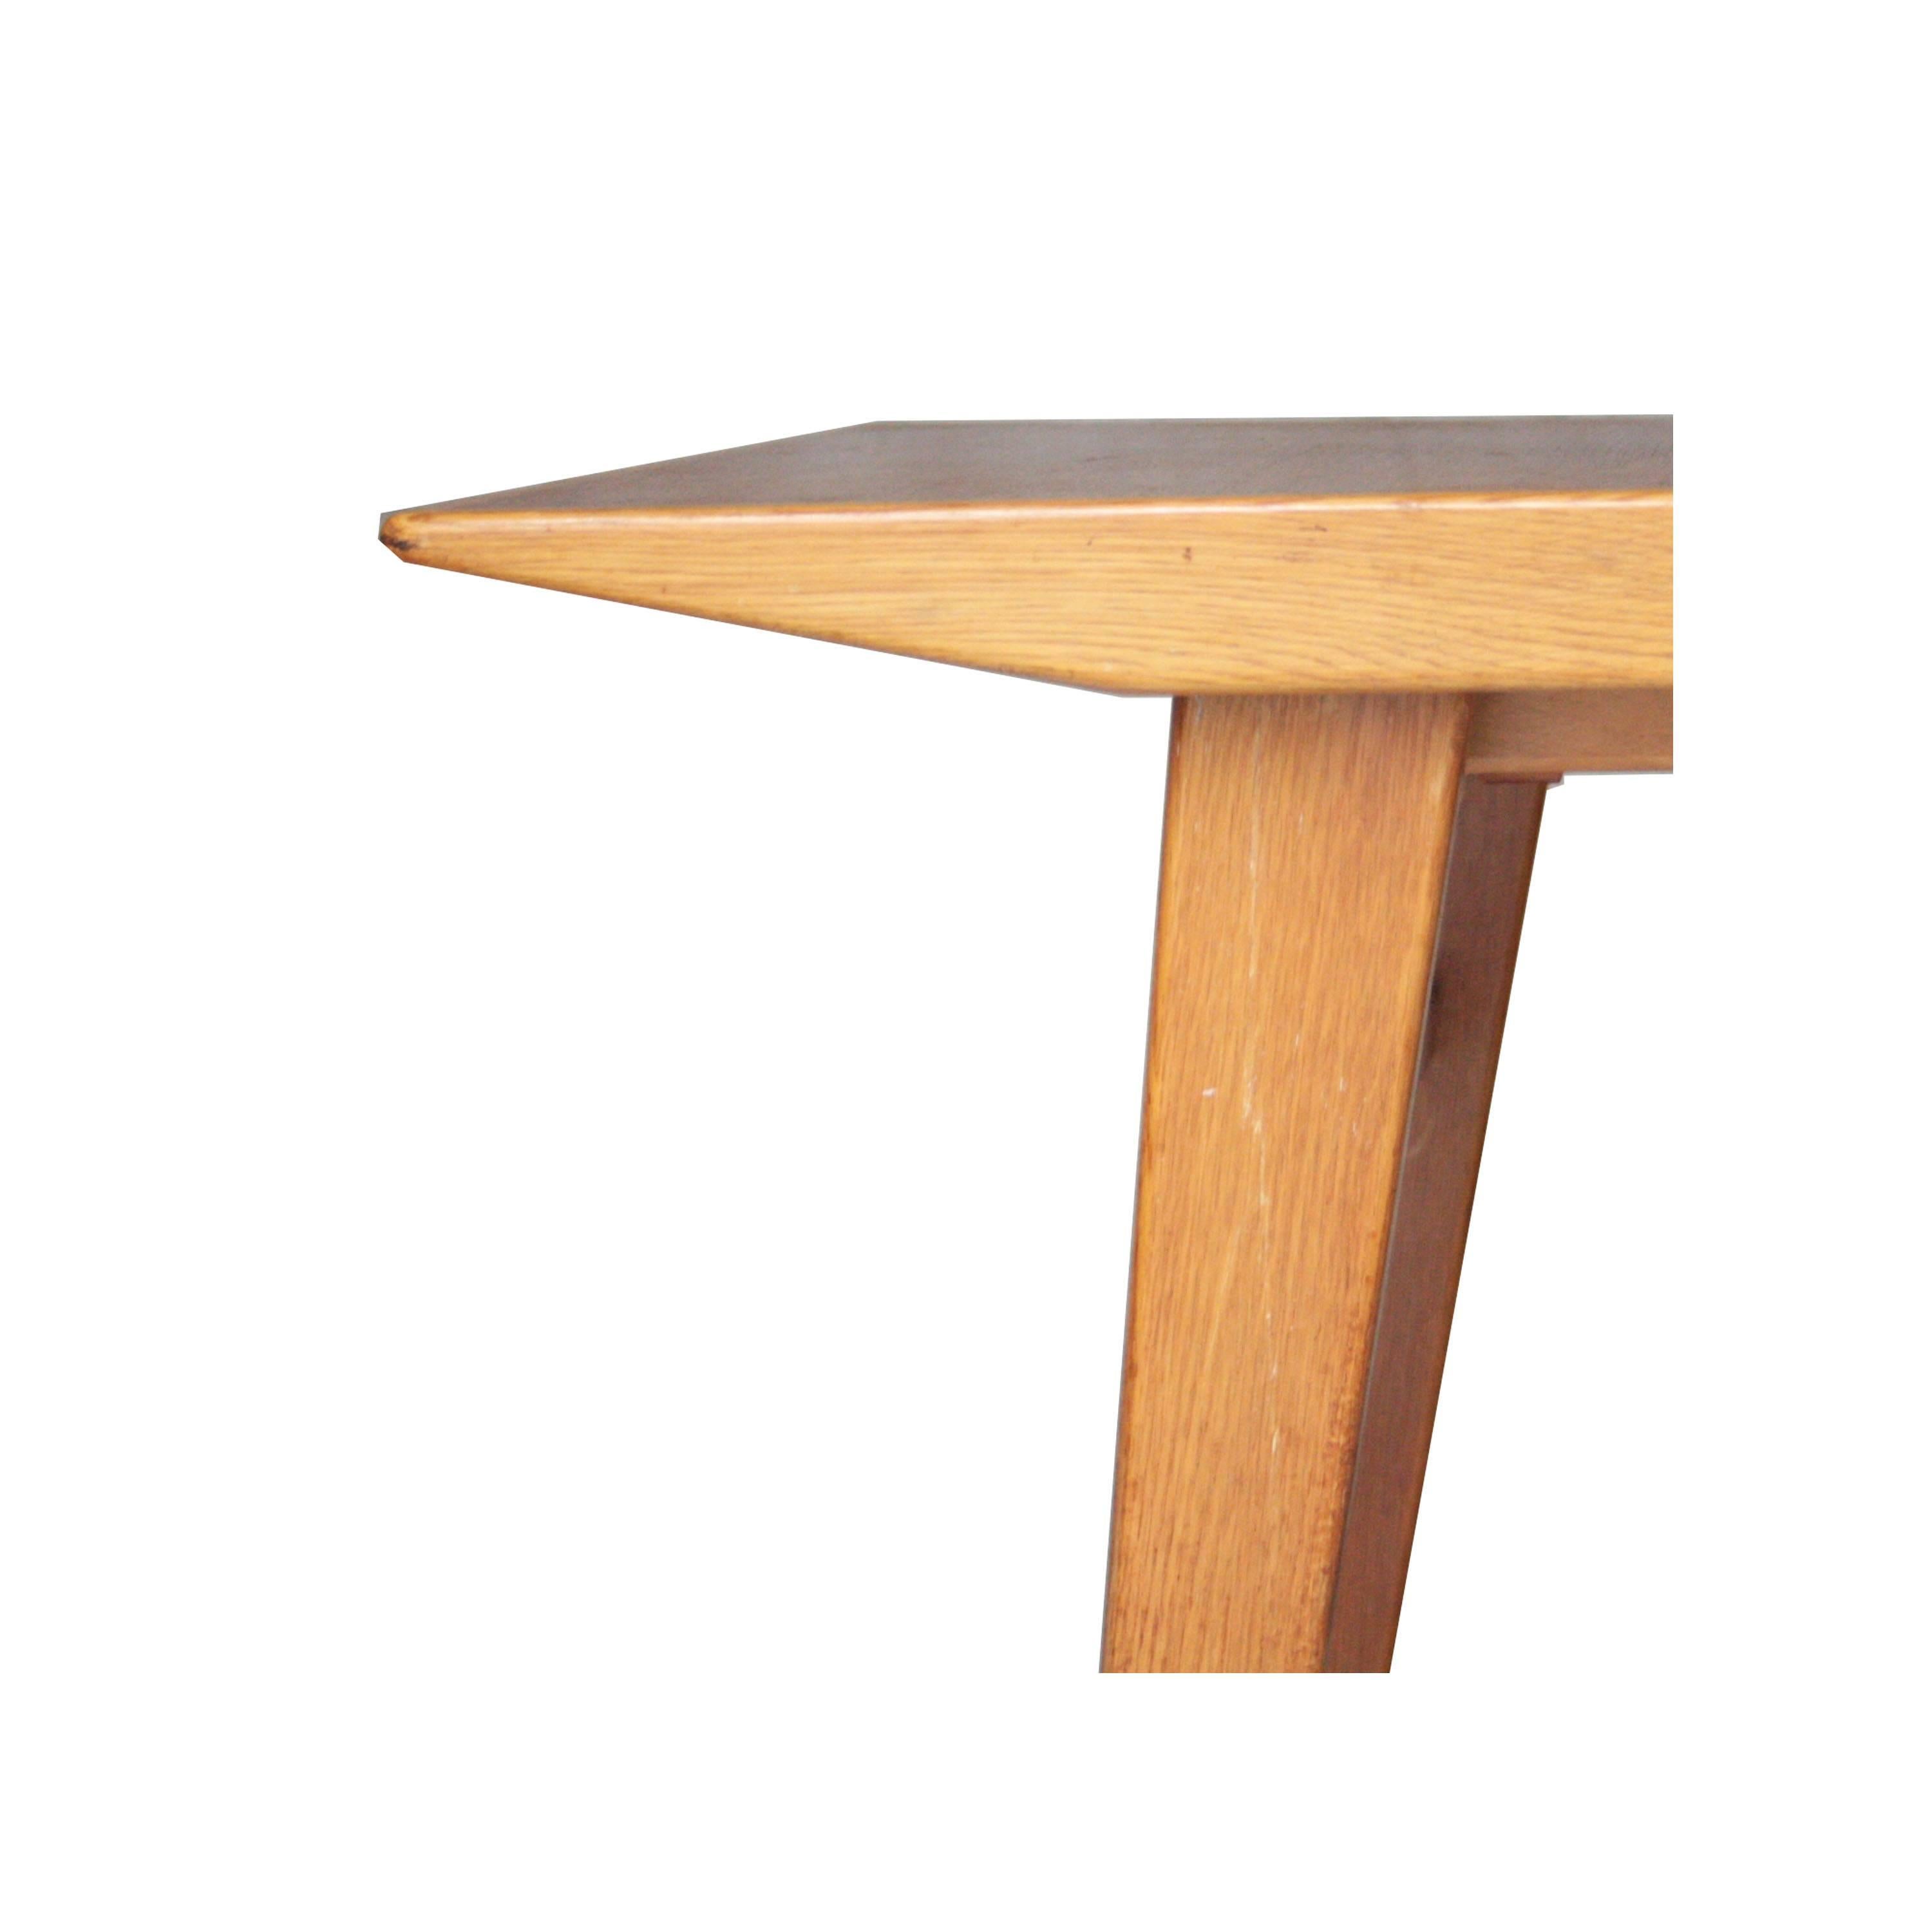 Extendable dining table with structure in teak wood, with legs and details made in oak.